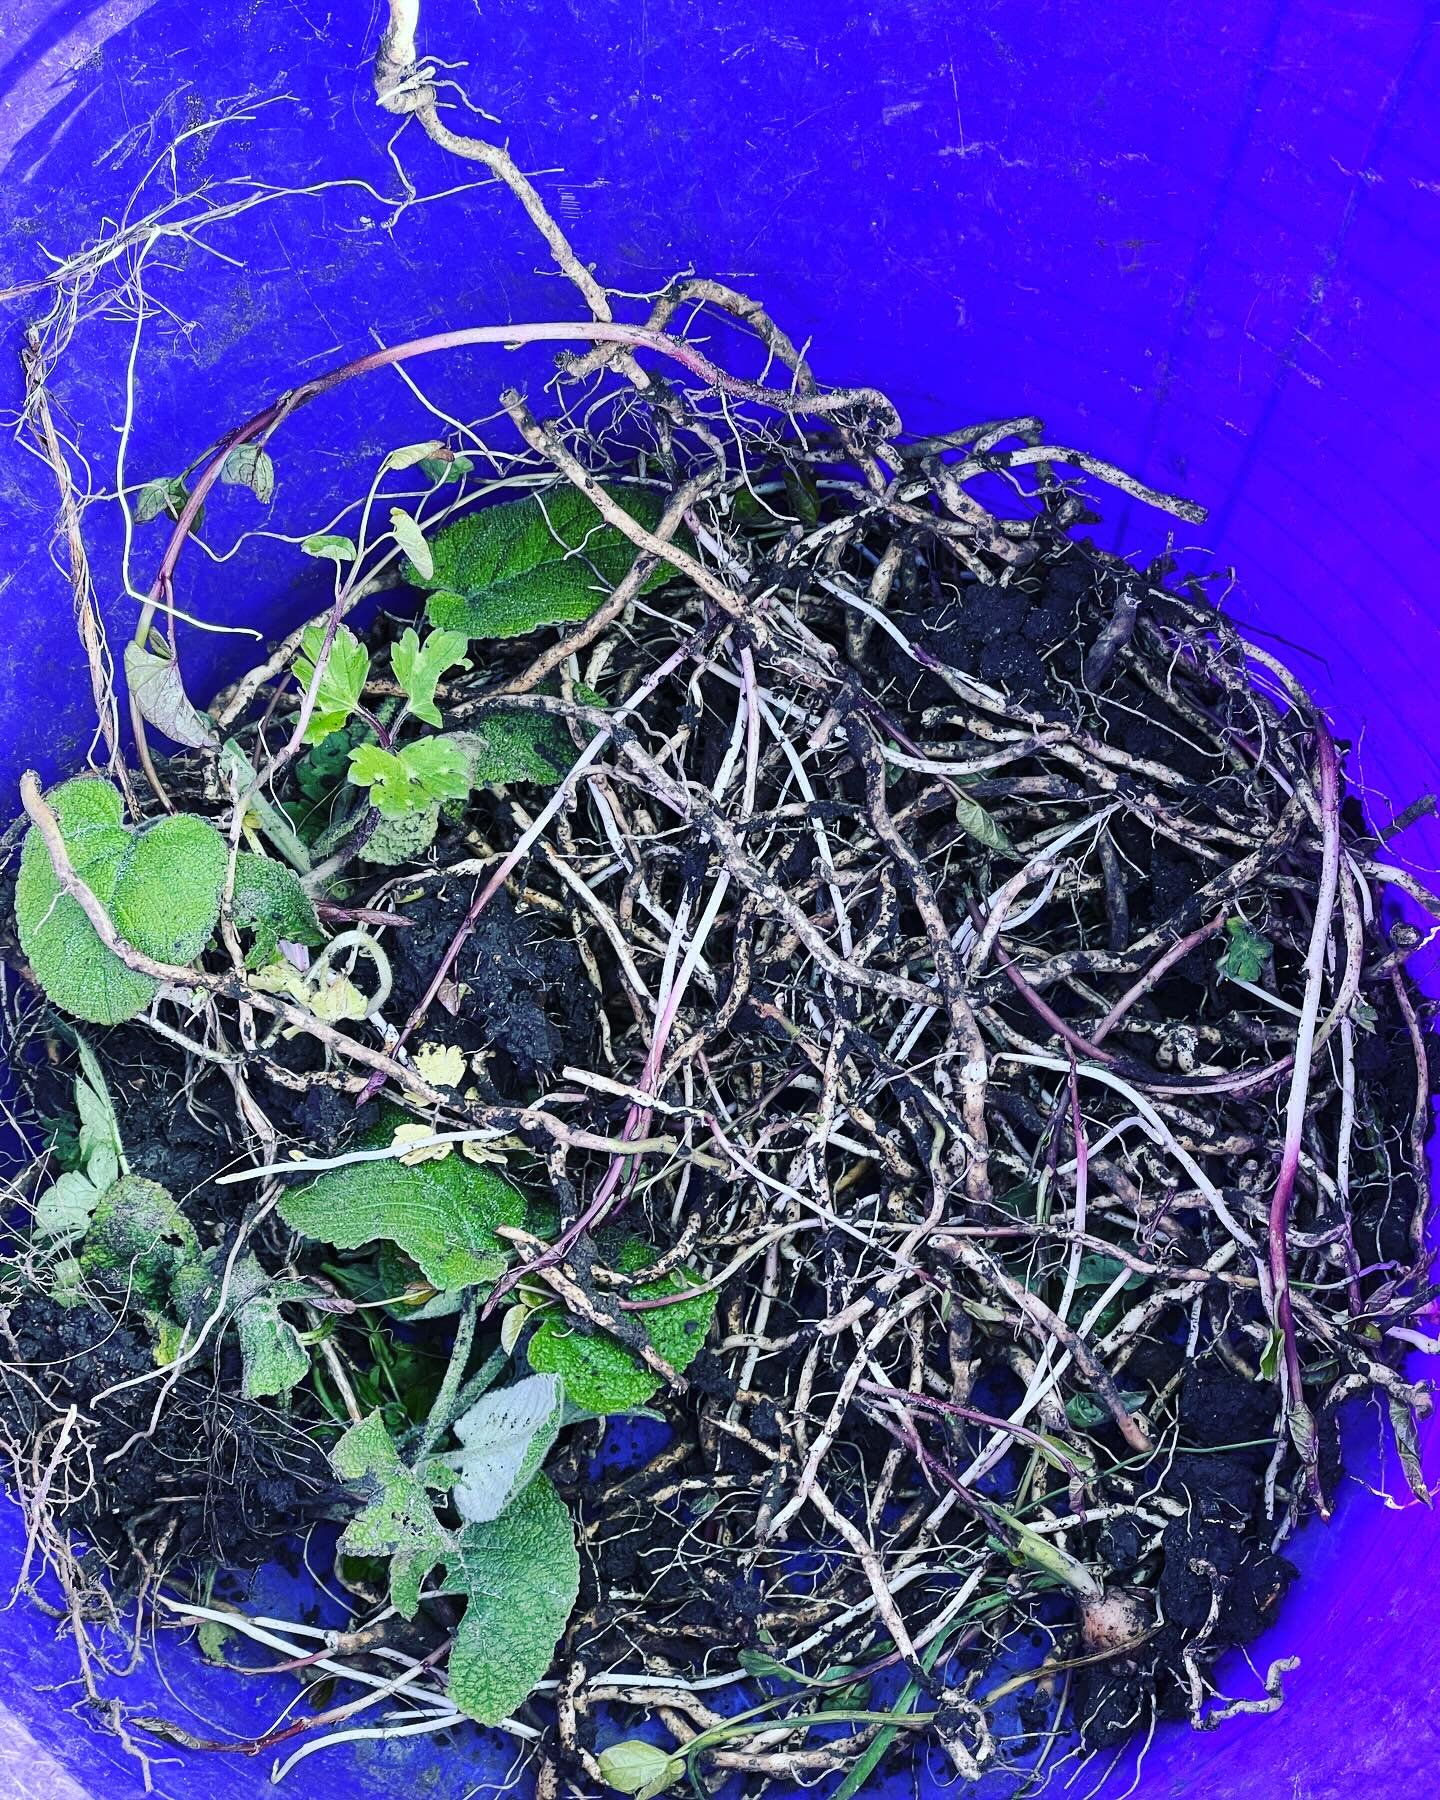 Another bucket of bindweed!  Such an annoying weed and really hard to eradicate, no amount of mulch will help either&hellip;. Best get digging #bindweed #soil #mulch #compost #pesky #perennial #gardener #gardening #horticulture